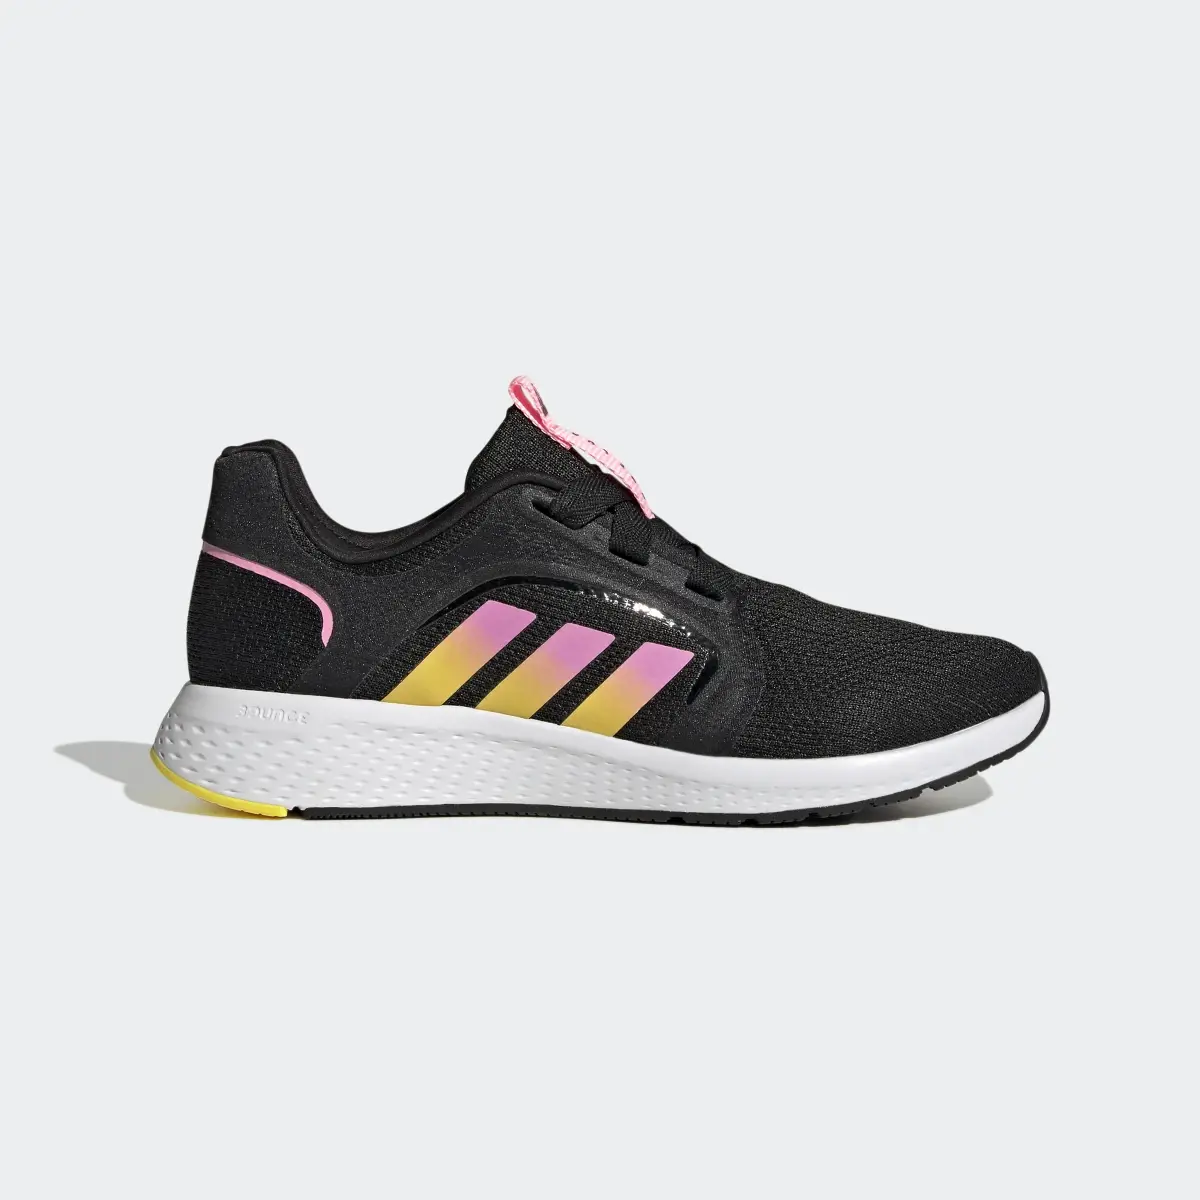 Adidas Edge Lux Shoes. 2